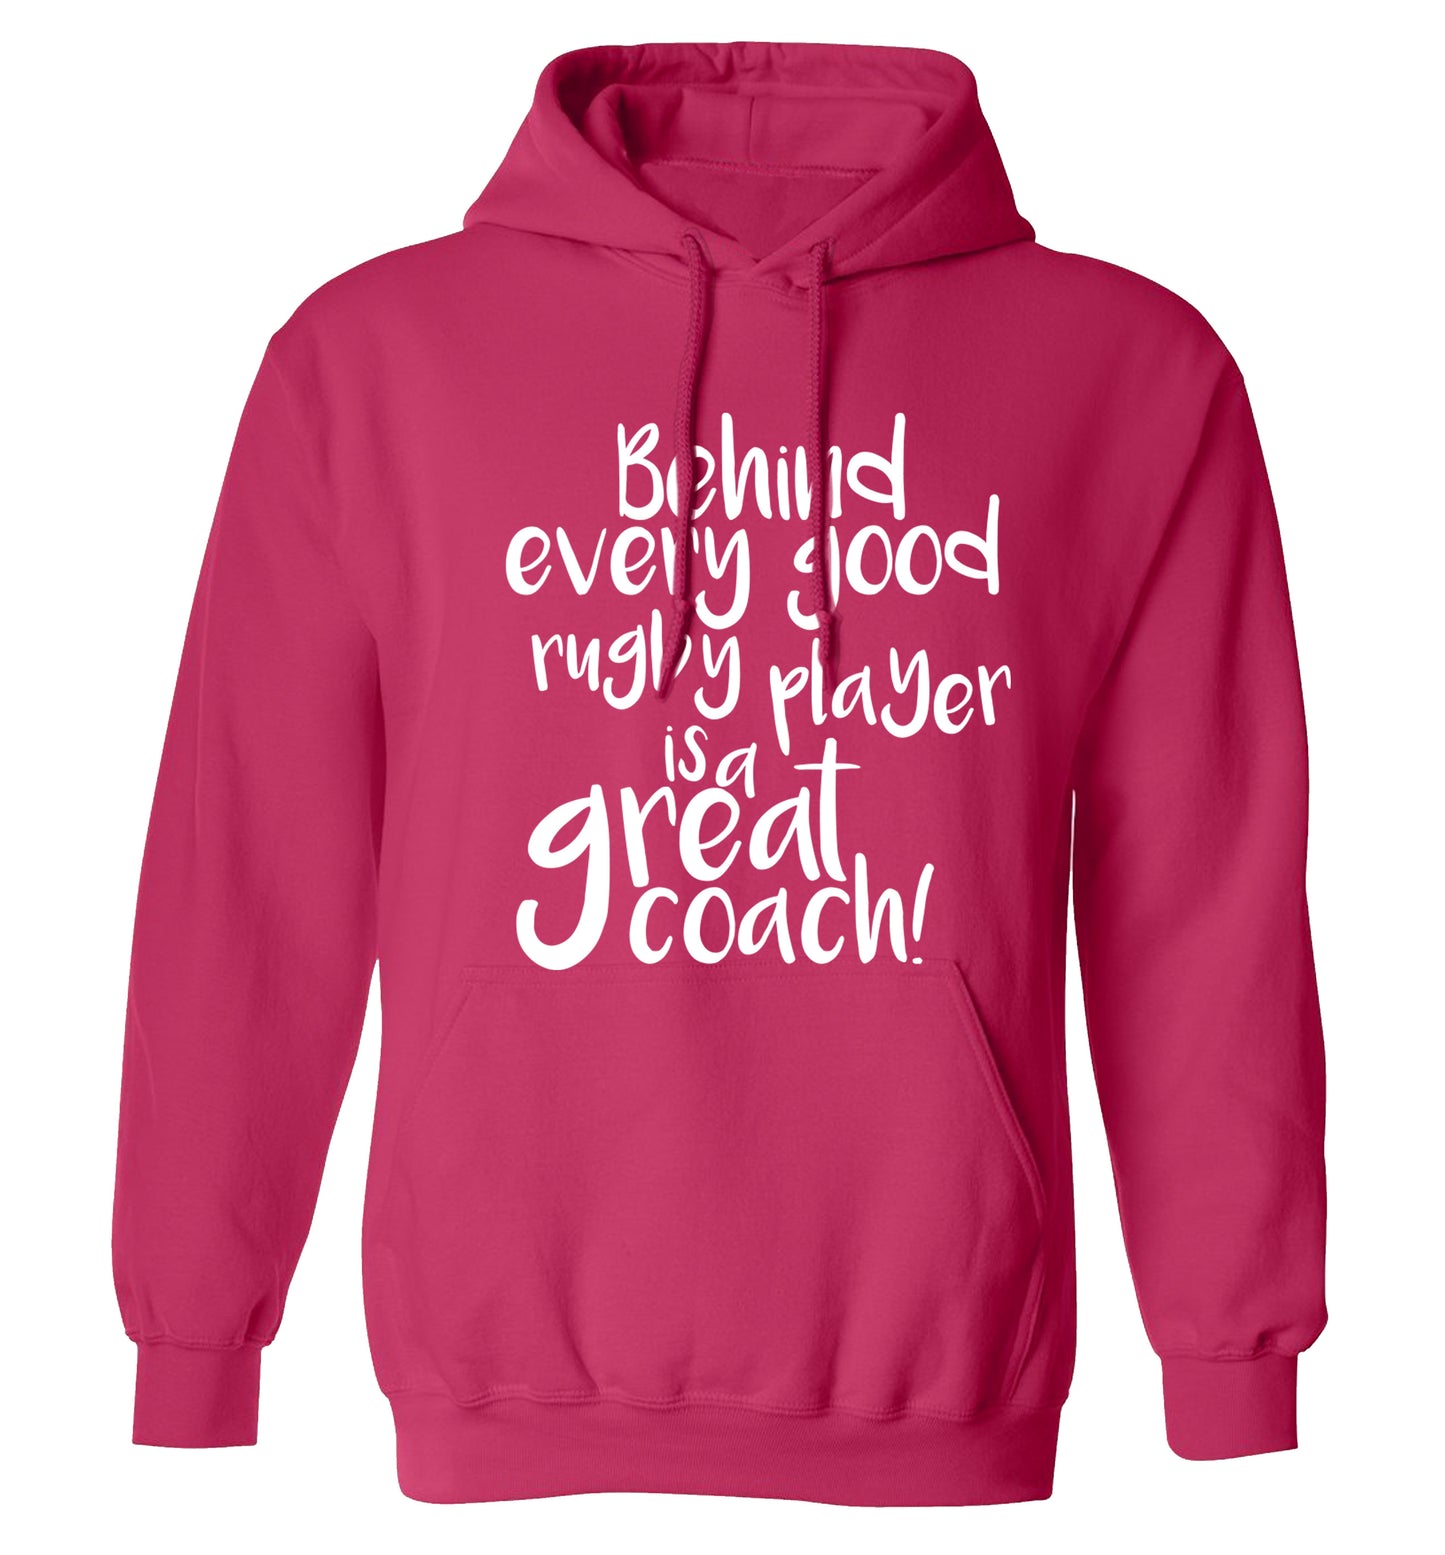 Behind every goor rugby player is a great coach adults unisex pink hoodie 2XL